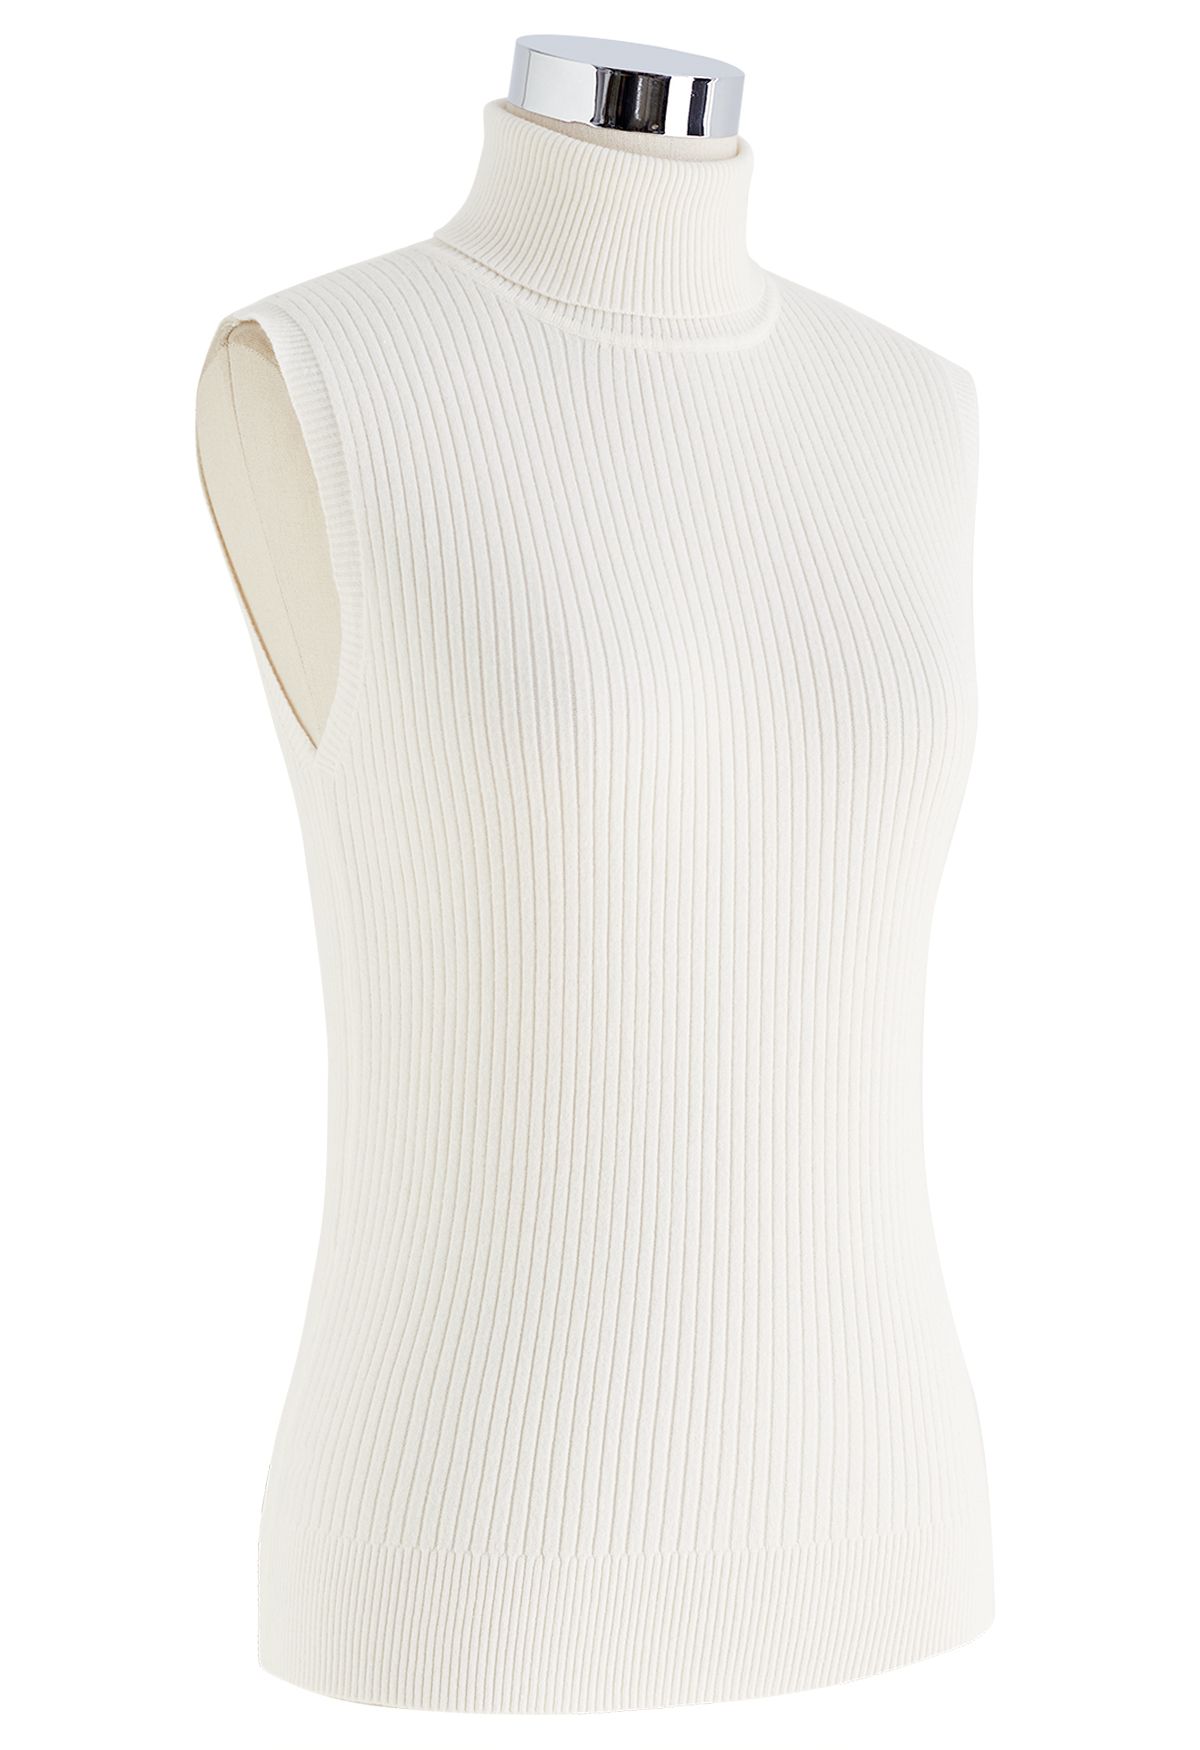 Turtleneck Soft Knit Sleeveless Top in White - Retro, Indie and Unique ...